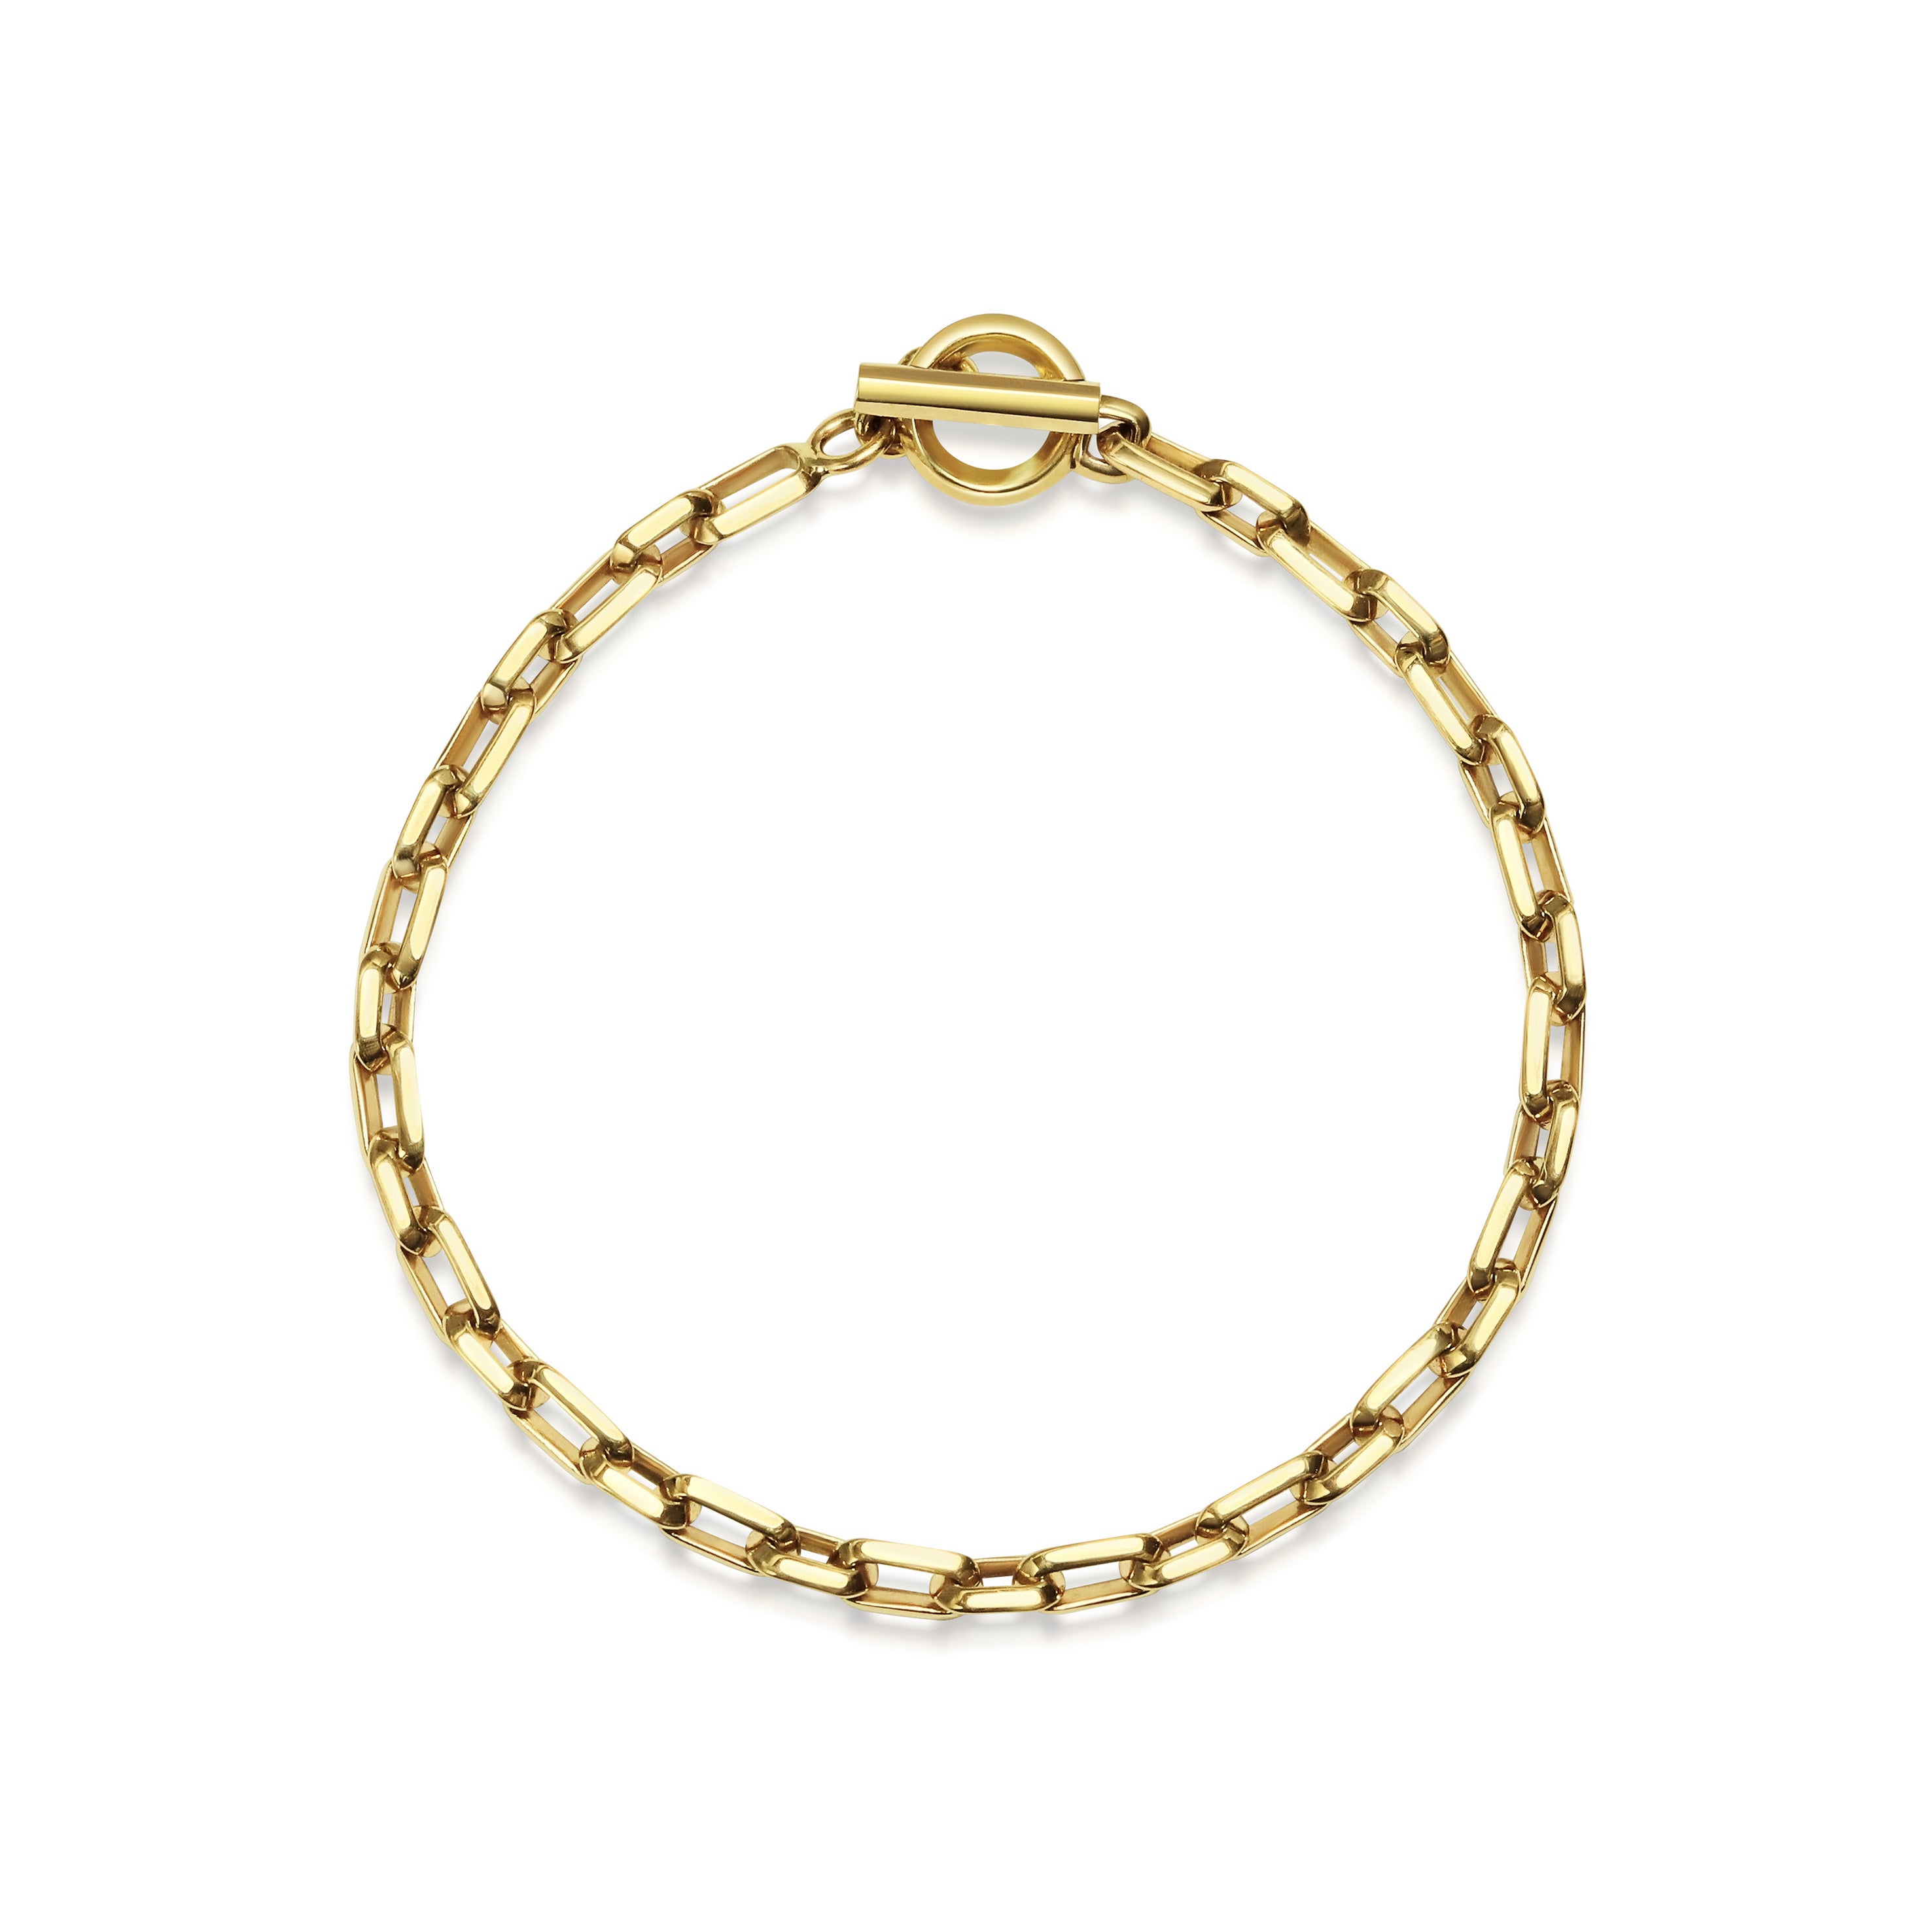 The Fine Knife Edge Bracelet by East London jeweller Rachel Boston | Discover our collections of unique and timeless engagement rings, wedding rings, and modern fine jewellery.